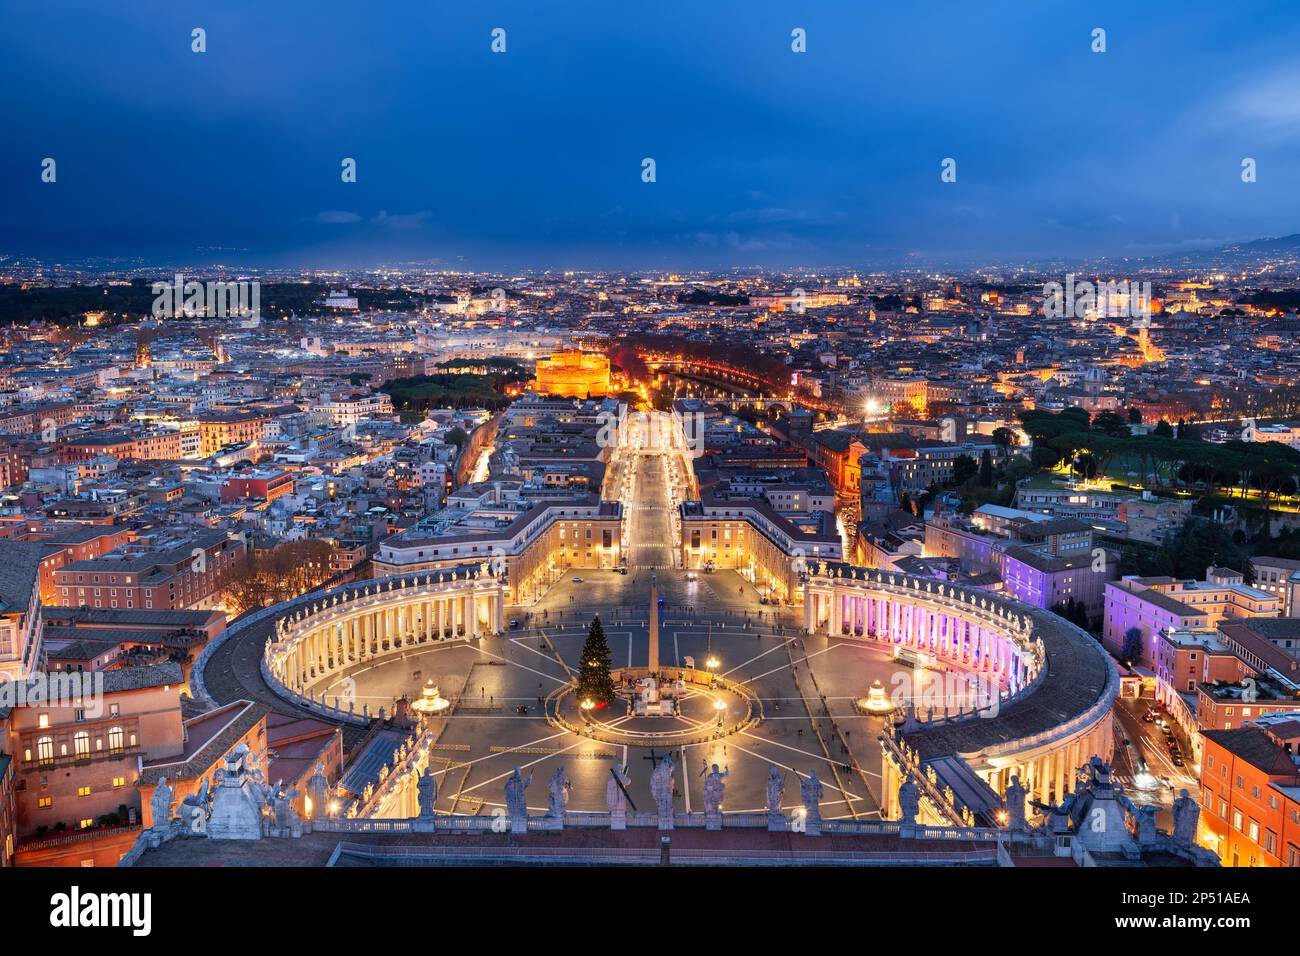 Vatican City overlooking St. Peter's Square surrounded by Rome, Italy at dusk. Stock Photo